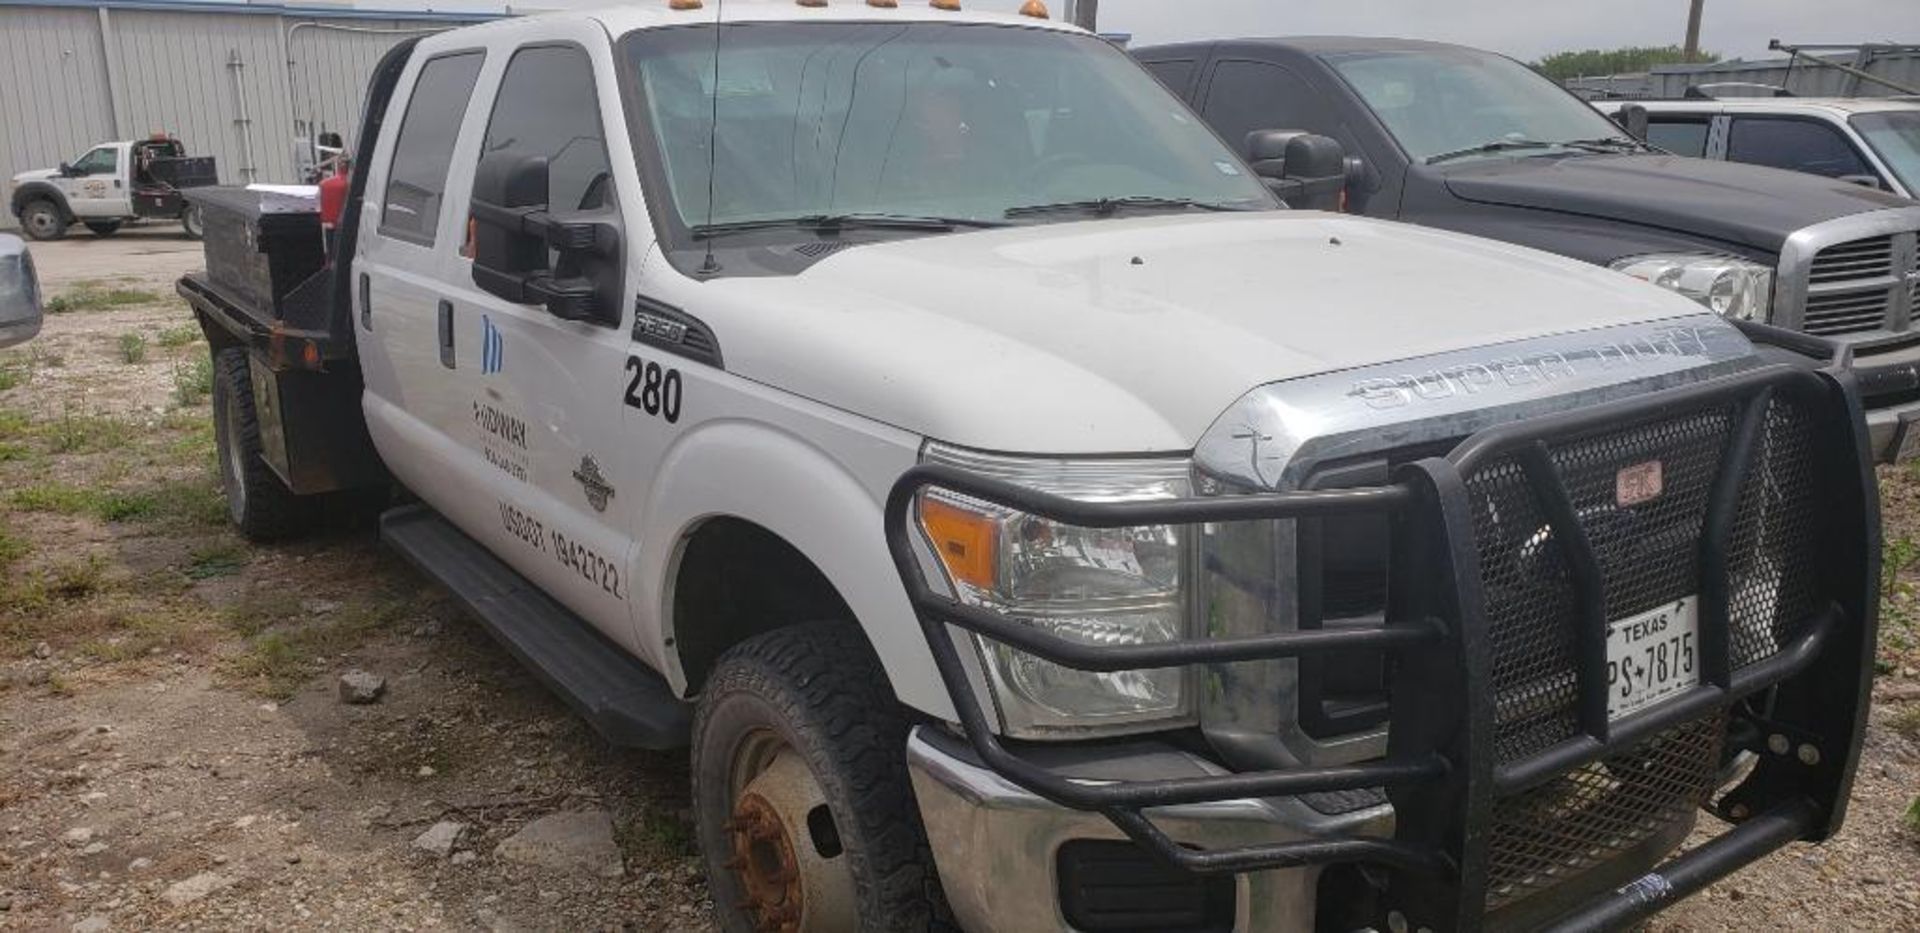 2015 Ford F 350 Super Duty Operator Truck, VIN 1FT*W3DTXFEA75453, 4X4, Crew Cab, #50280, Not Running - Image 2 of 6